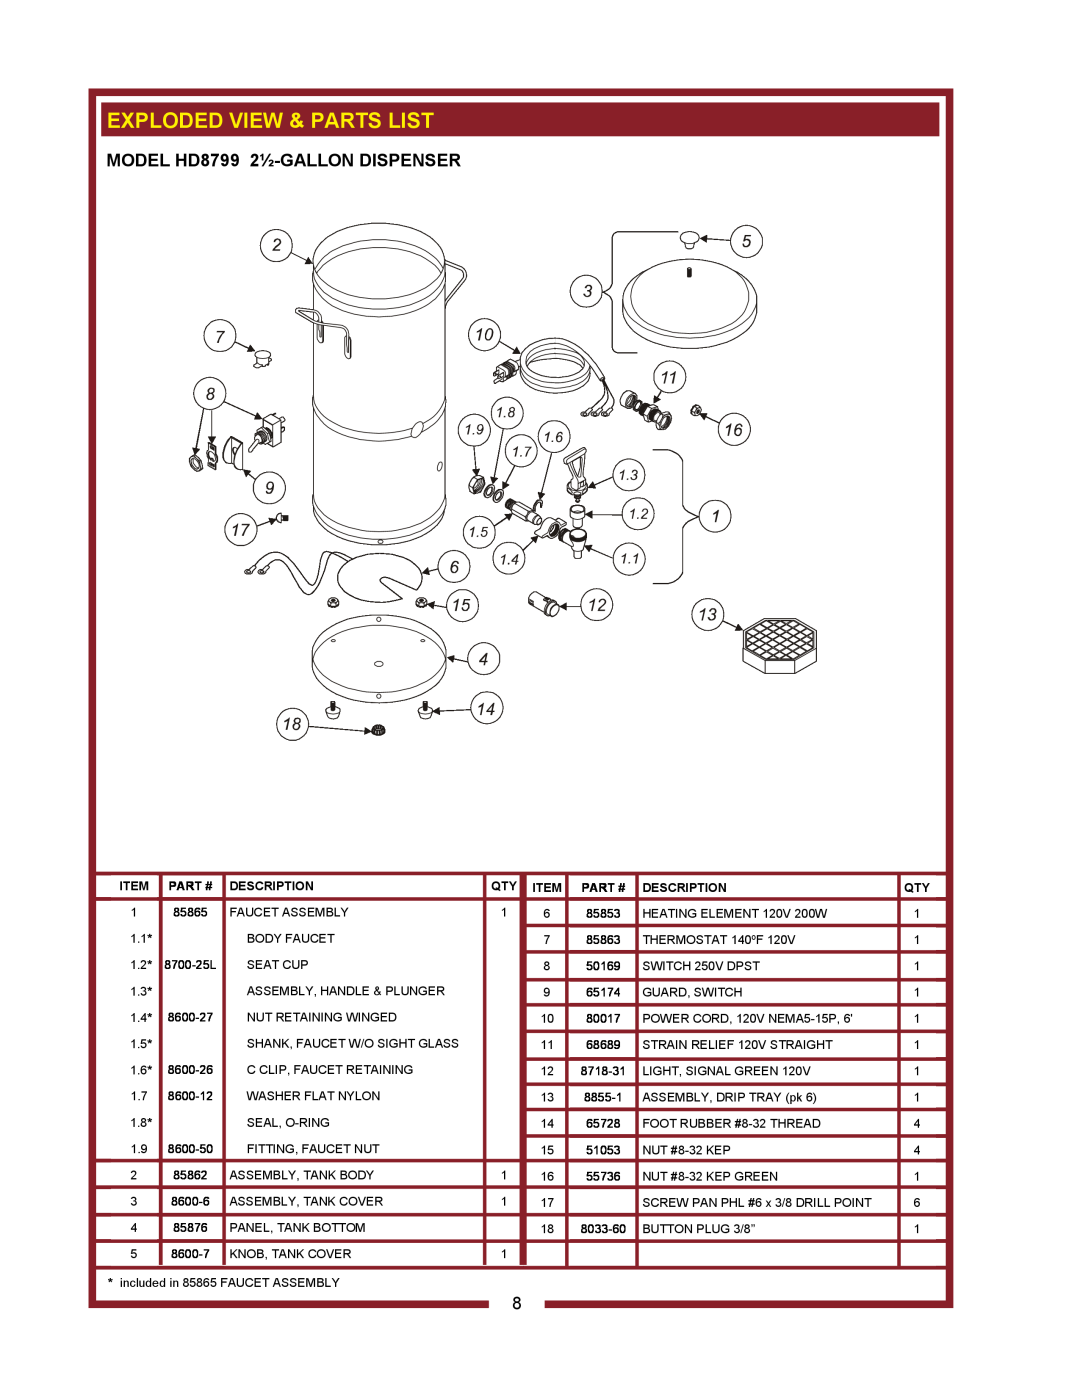 Bloomfield HD8799, HD8802 owner manual Exploded View & Parts List, Part #, Description 